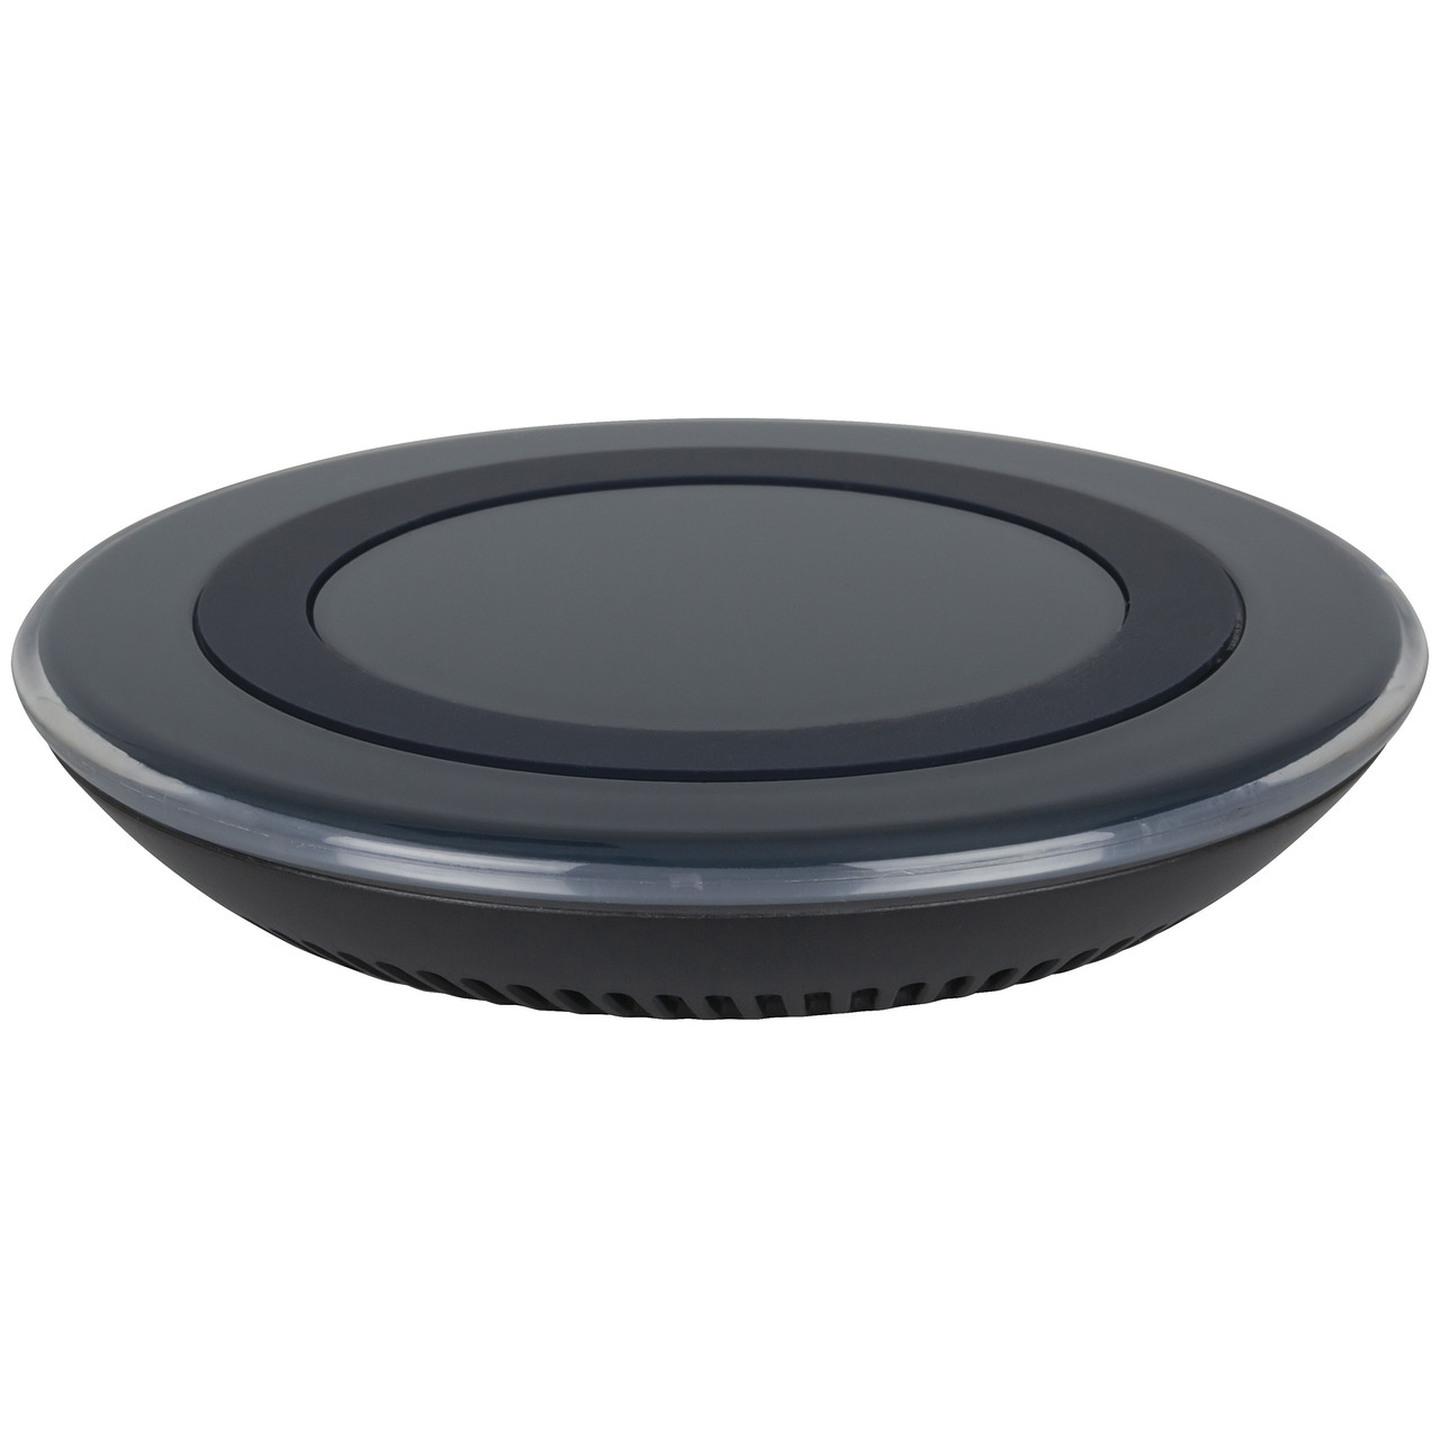 Hyperian Fast Wireless QI Charger